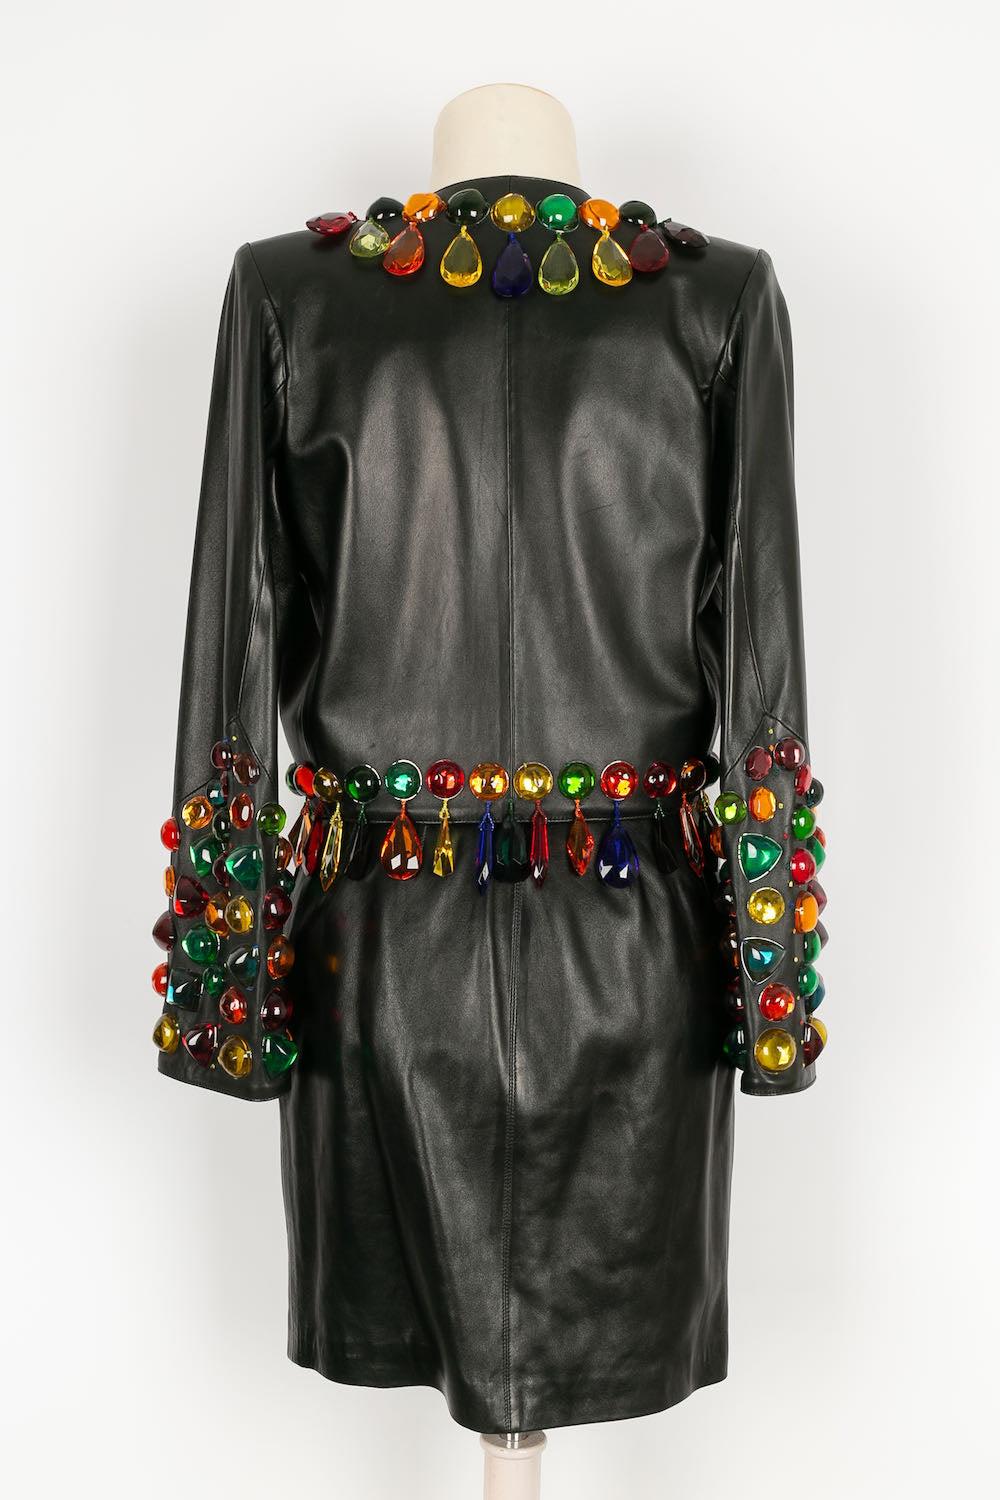 Yves Saint Laurent Leather Suit with Tassels, 1990 For Sale 2